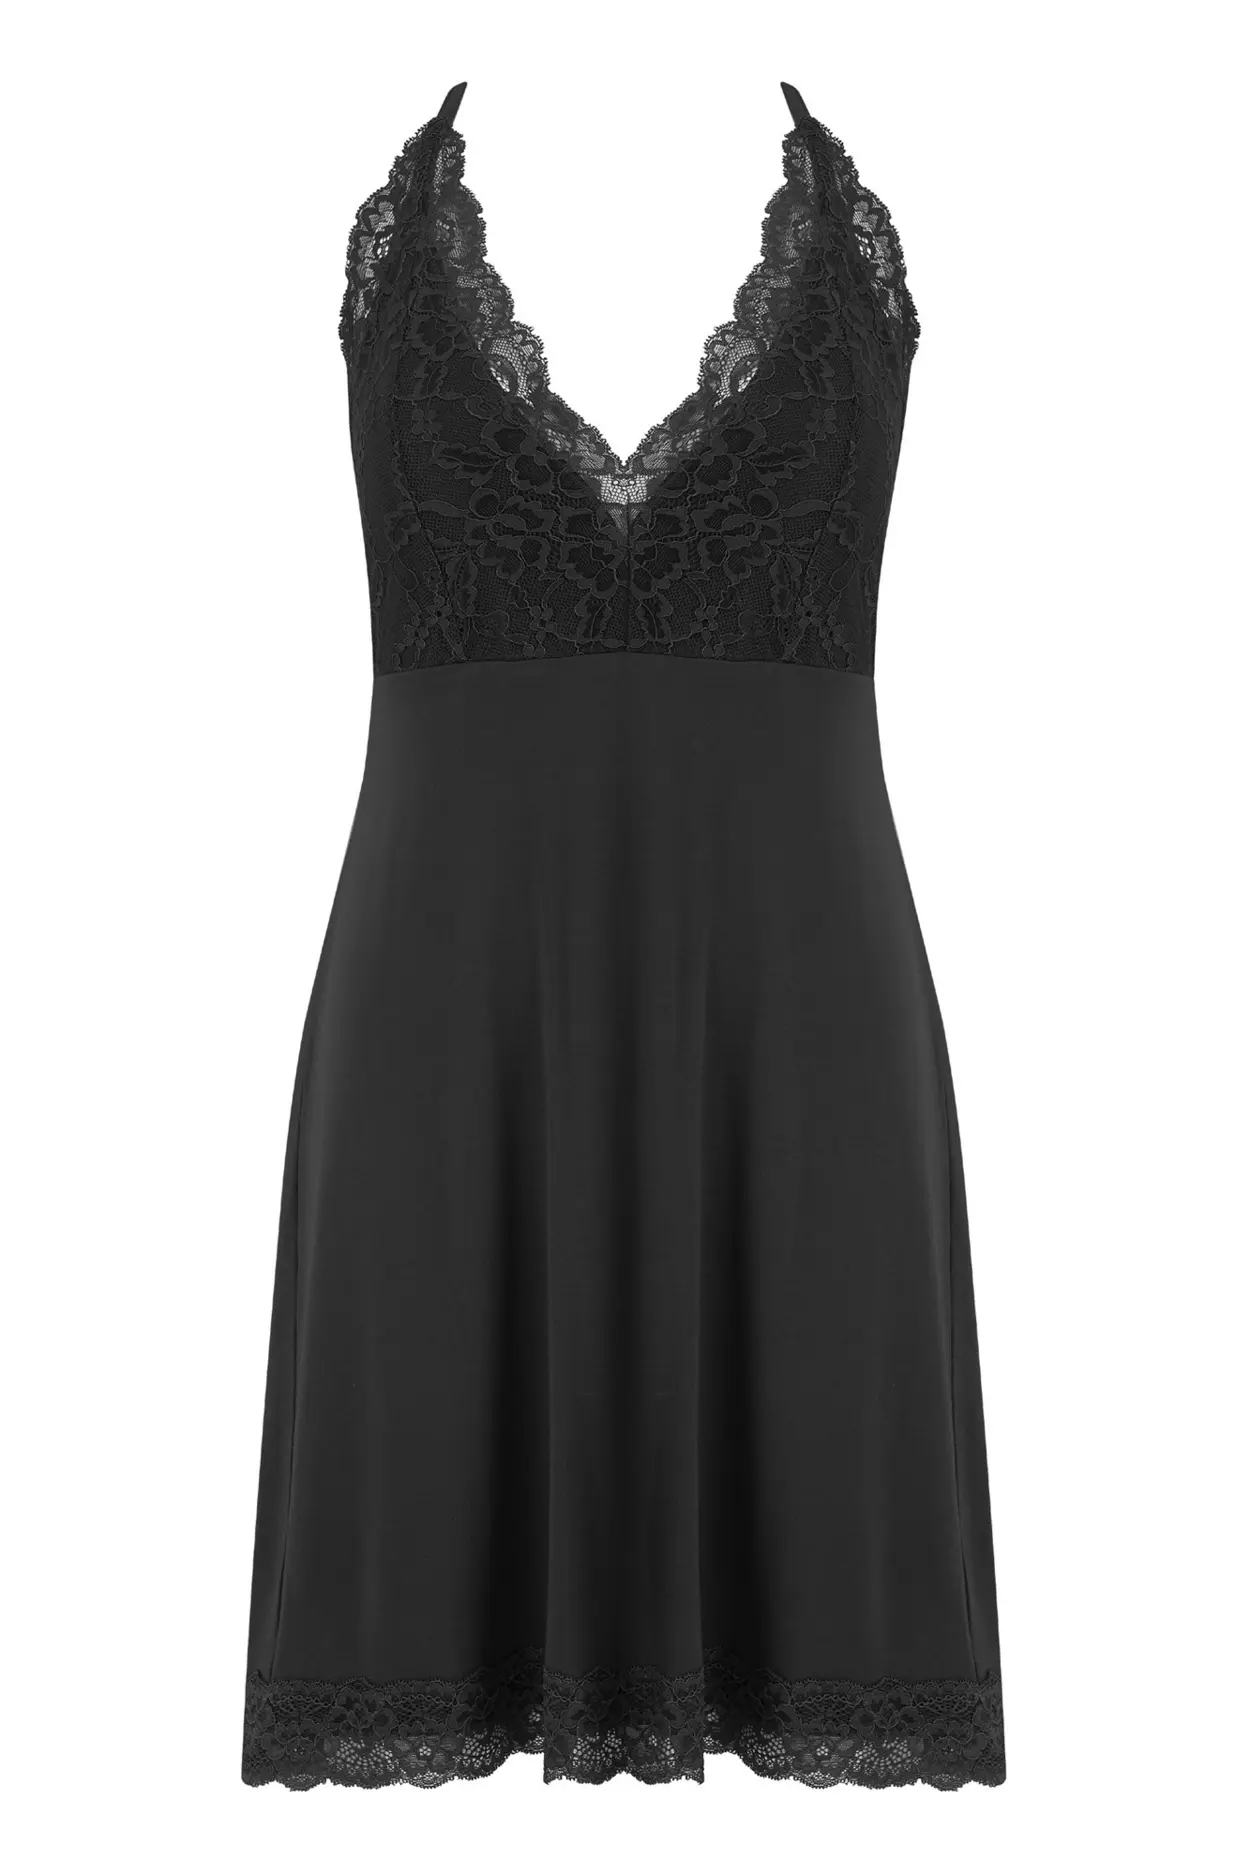 Sofa Loves Lace Removable Cup Jersey Chemise | Pour Moi | Sofa Loves ...